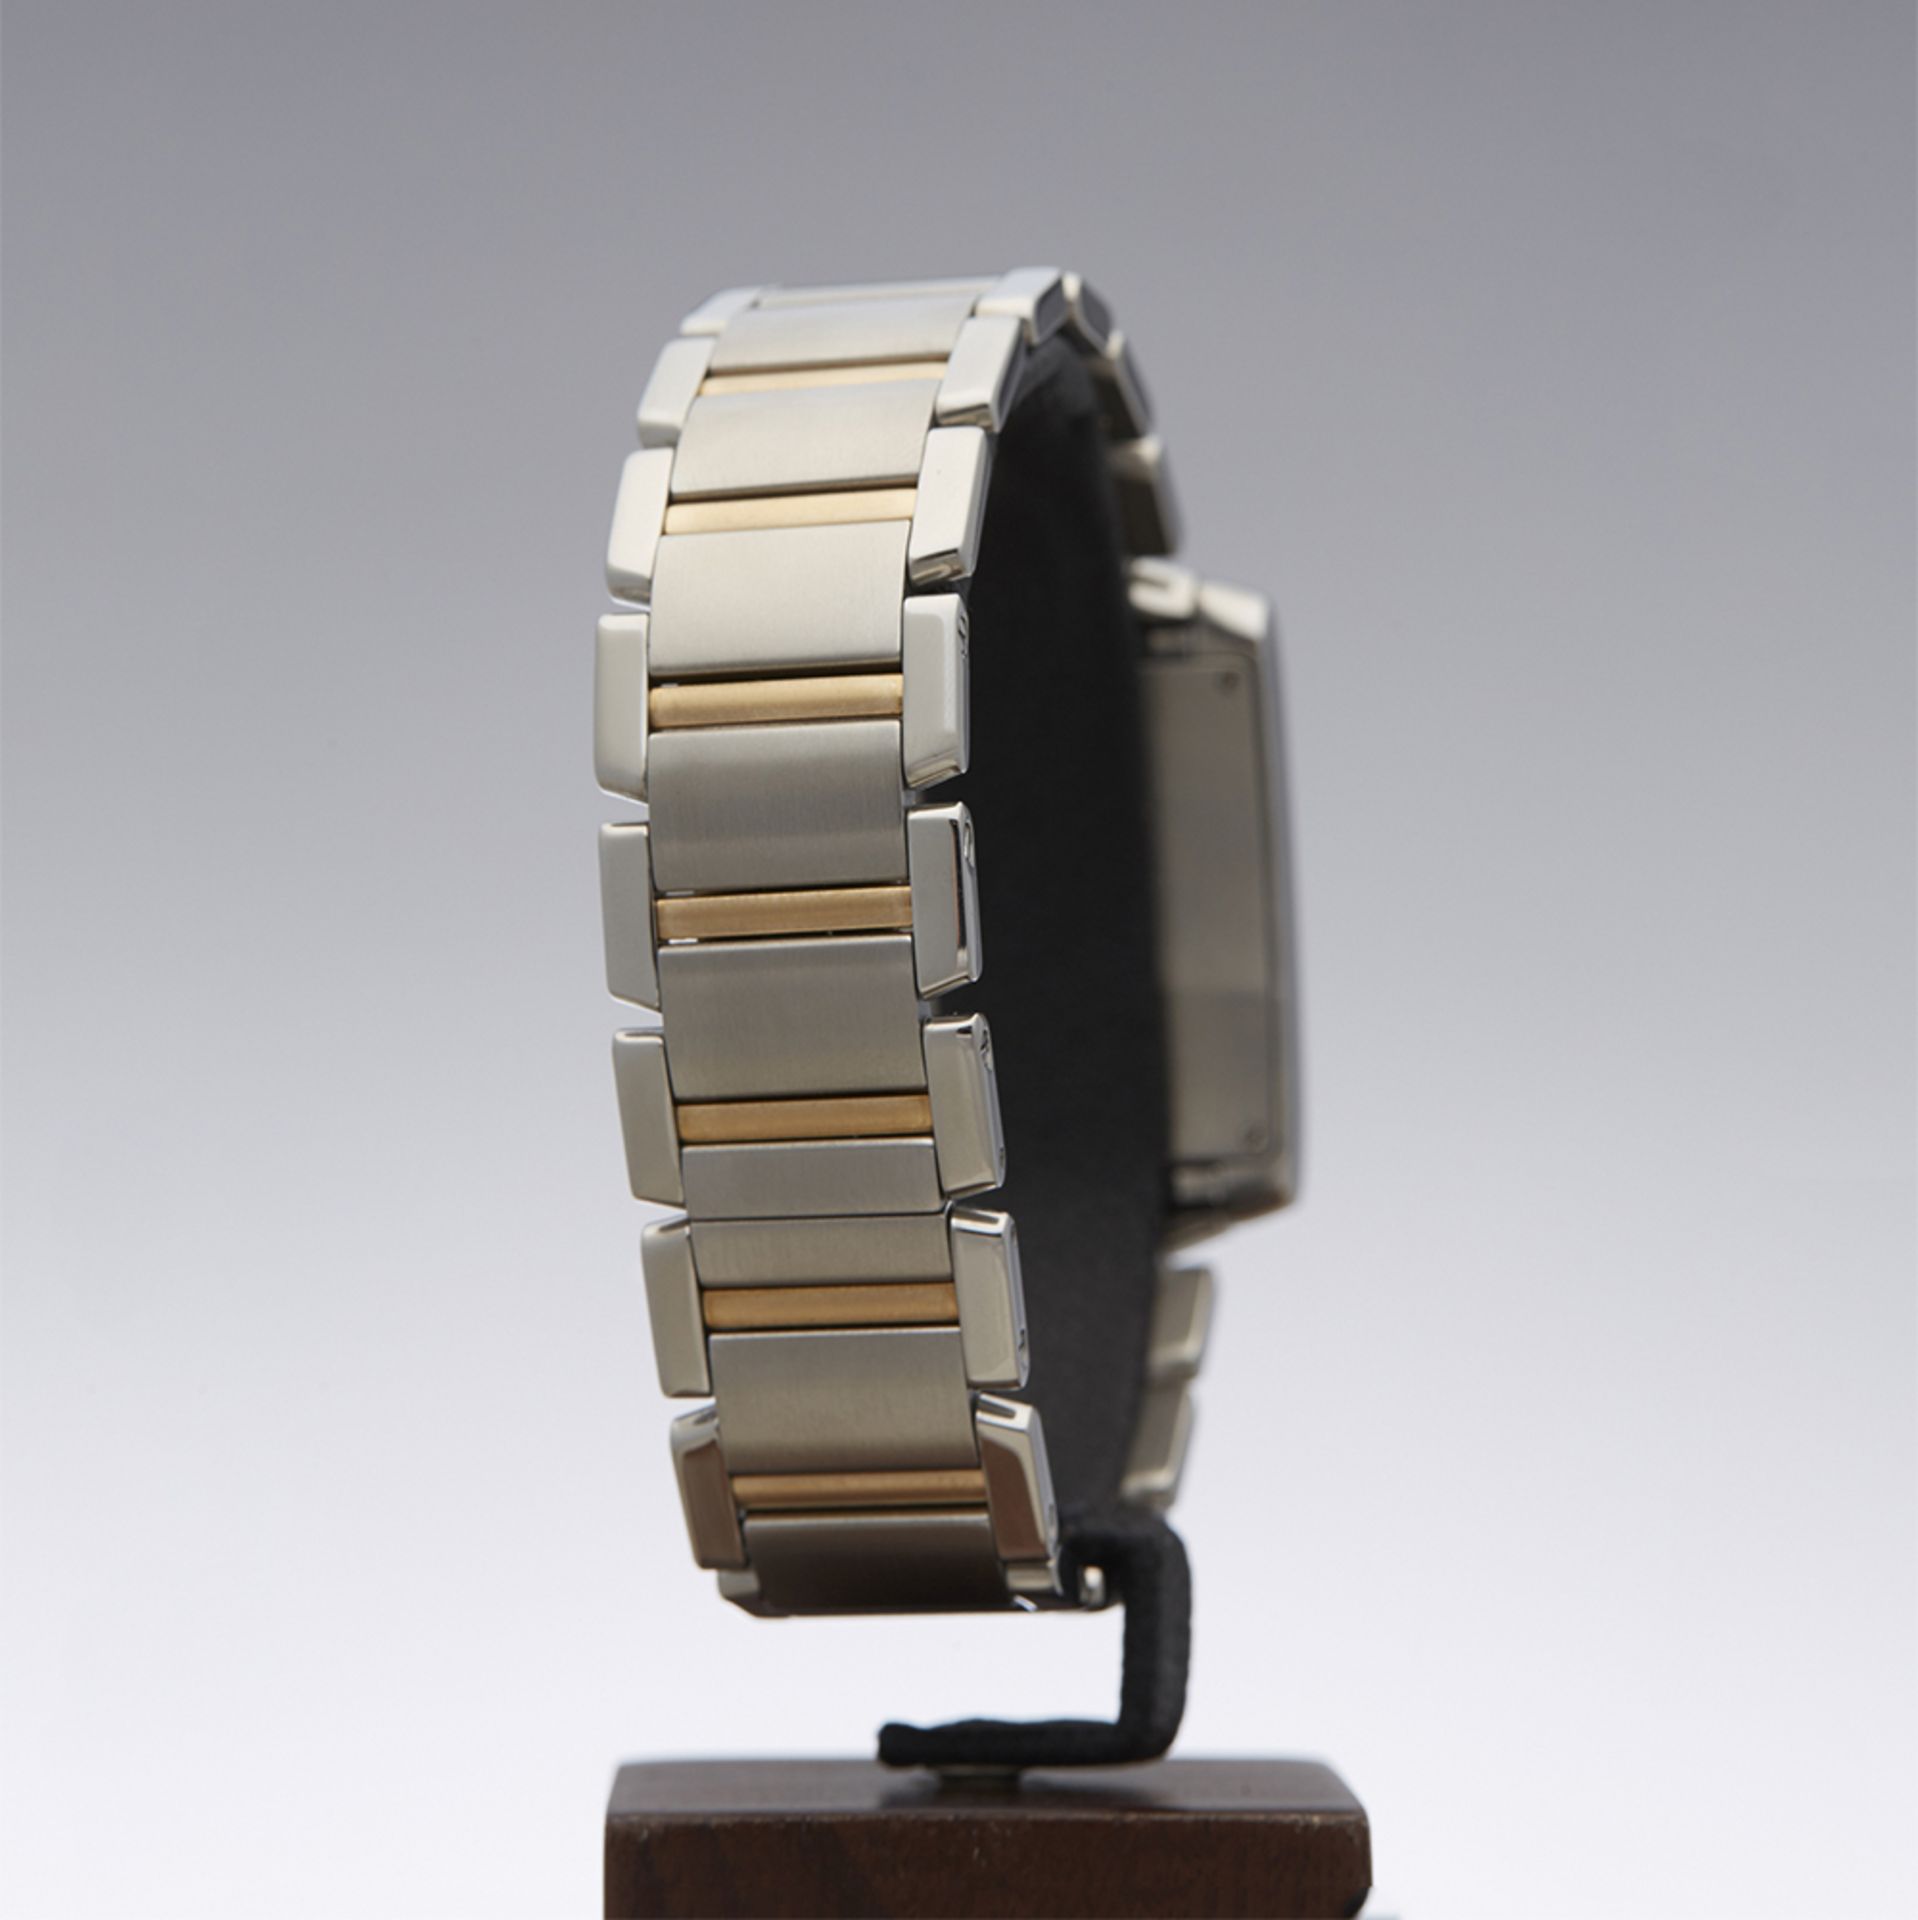 Cartier, Tank Francaise Chronoreflex 28mm Stainless Steel & 18k Yellow Gold 2303 or W51004Q4 - Image 7 of 9